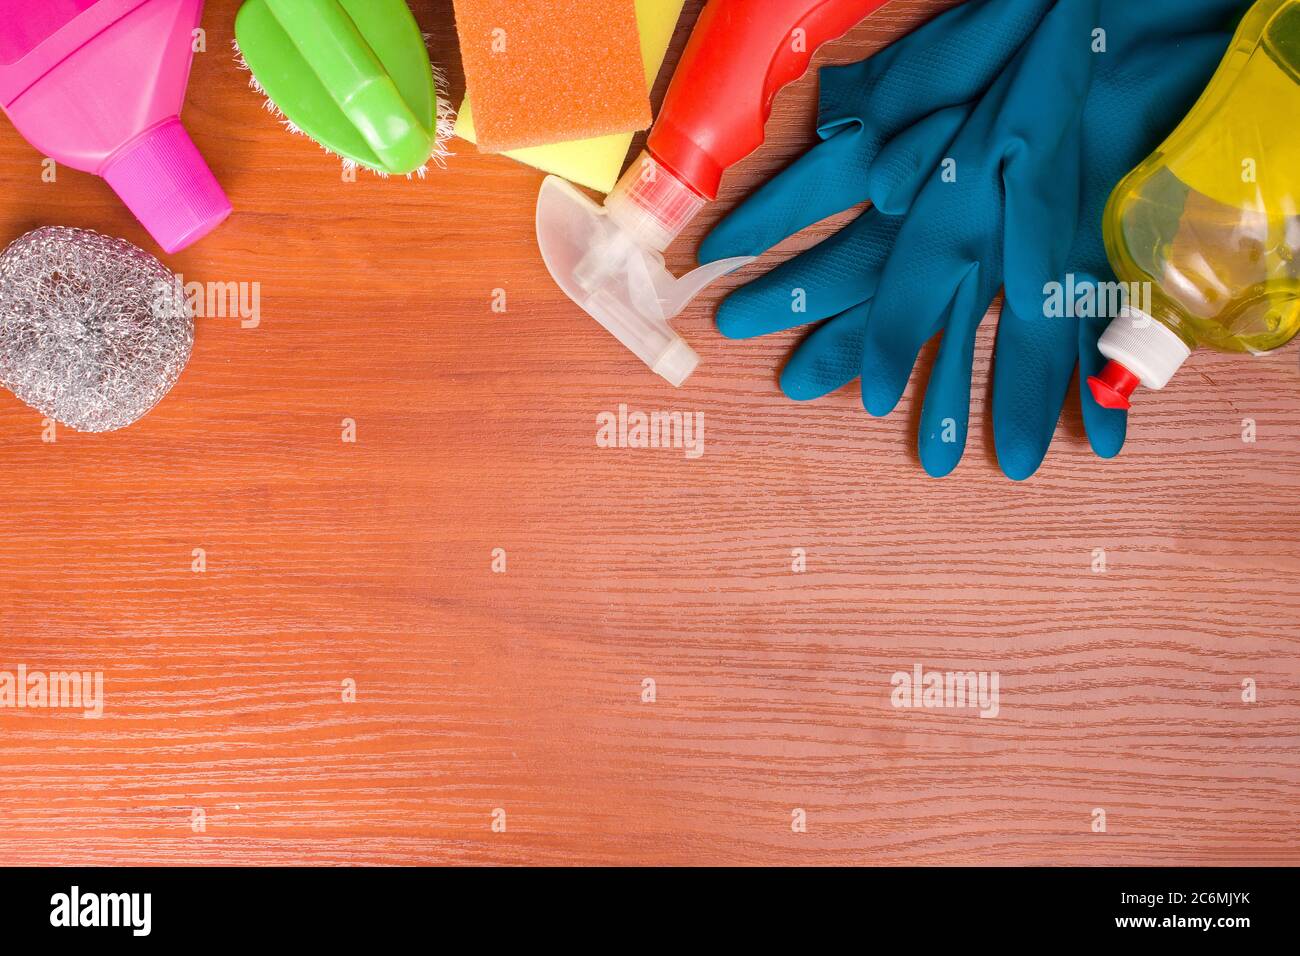 Set for cleaning various surfaces in the kitchen, bathroom and other areas. Copyspace for text or logo on a wooden background. The concept of cleaning services, house cleaning Flat lay Stock Photo